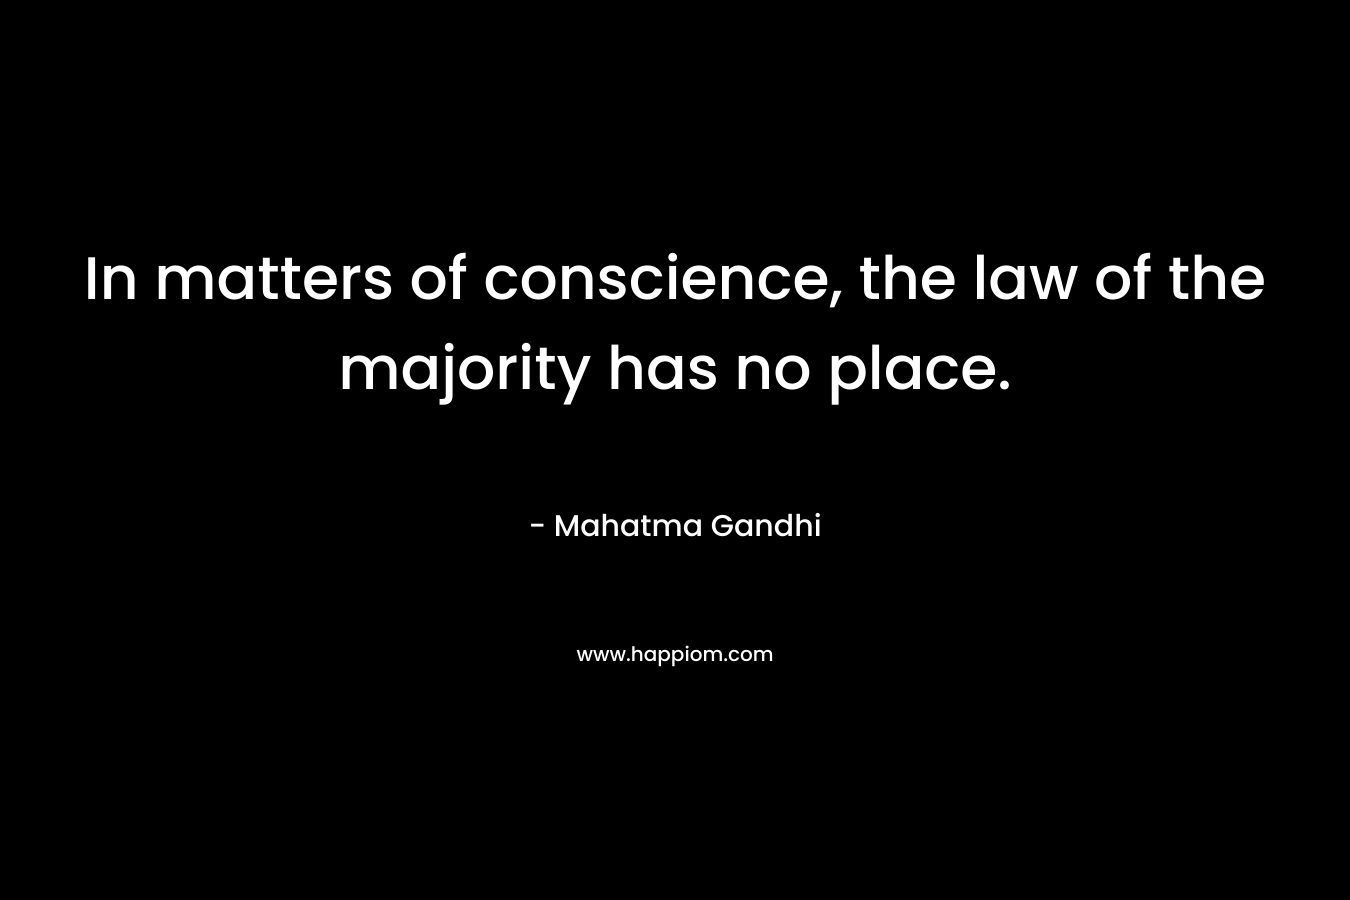 In matters of conscience, the law of the majority has no place. – Mahatma Gandhi